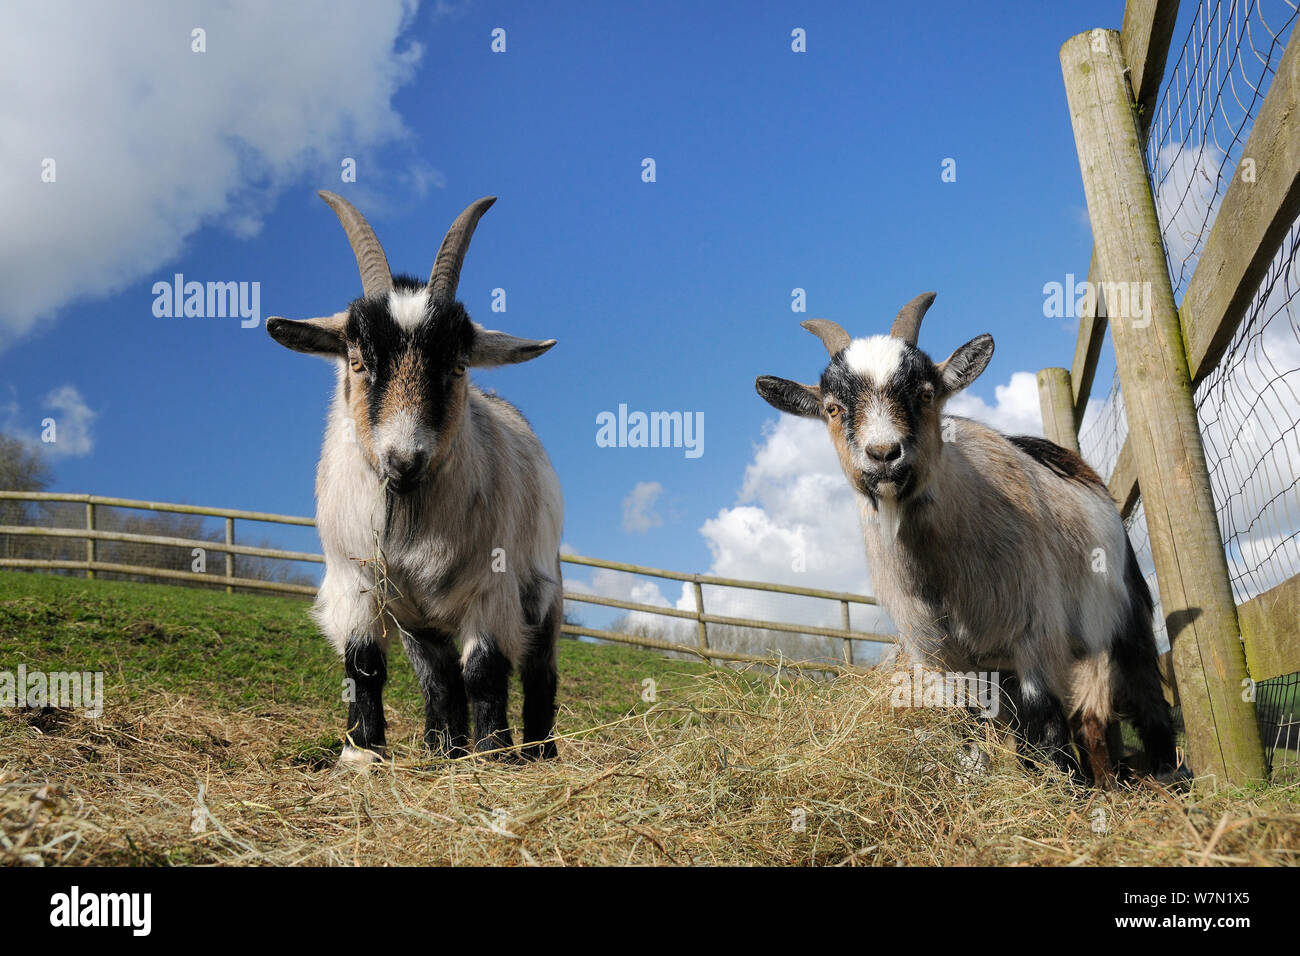 Two adult Pygmy goats (Capra hircus) in a fenced paddock, Wiltshire, UK, March. Stock Photo